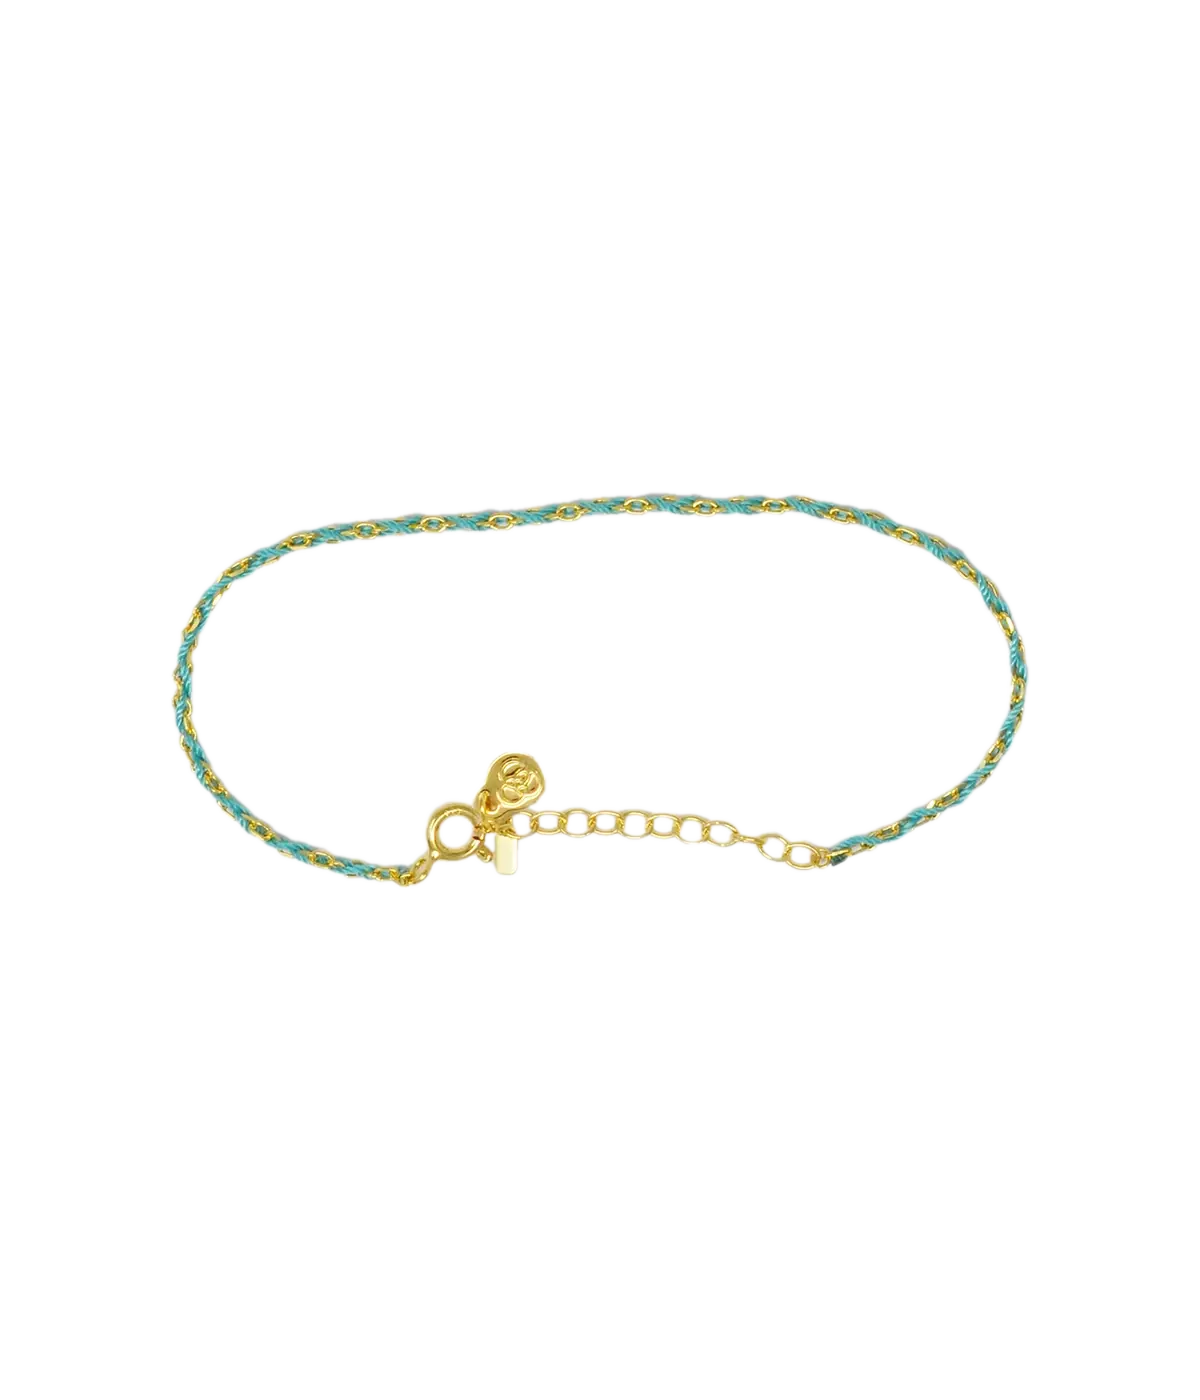 Rook Bracelet in 14K Yellow Gold & Teal